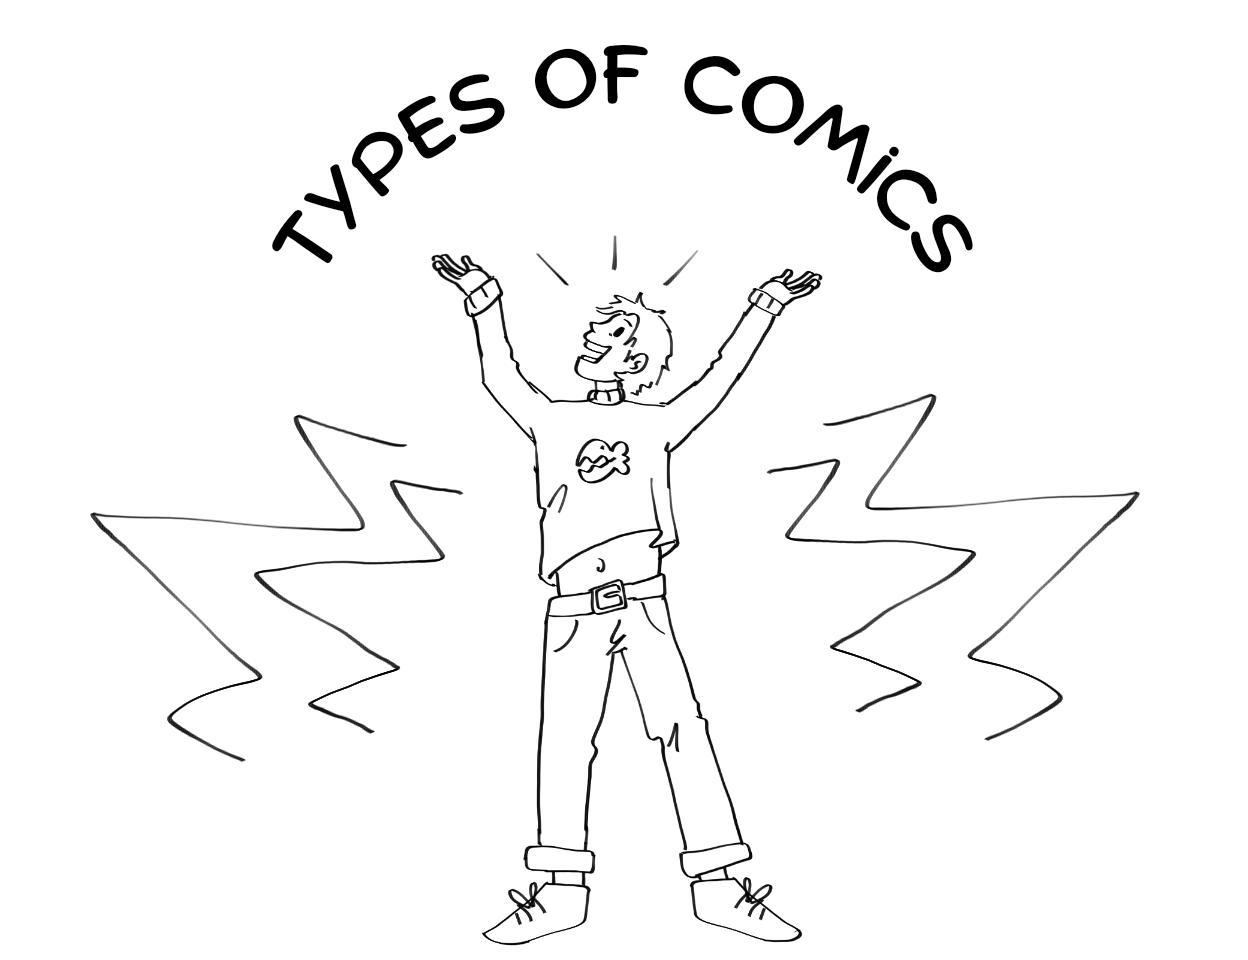 J. stands with both arms above their head. They gesture happily to a curved header that reads "types of comics".